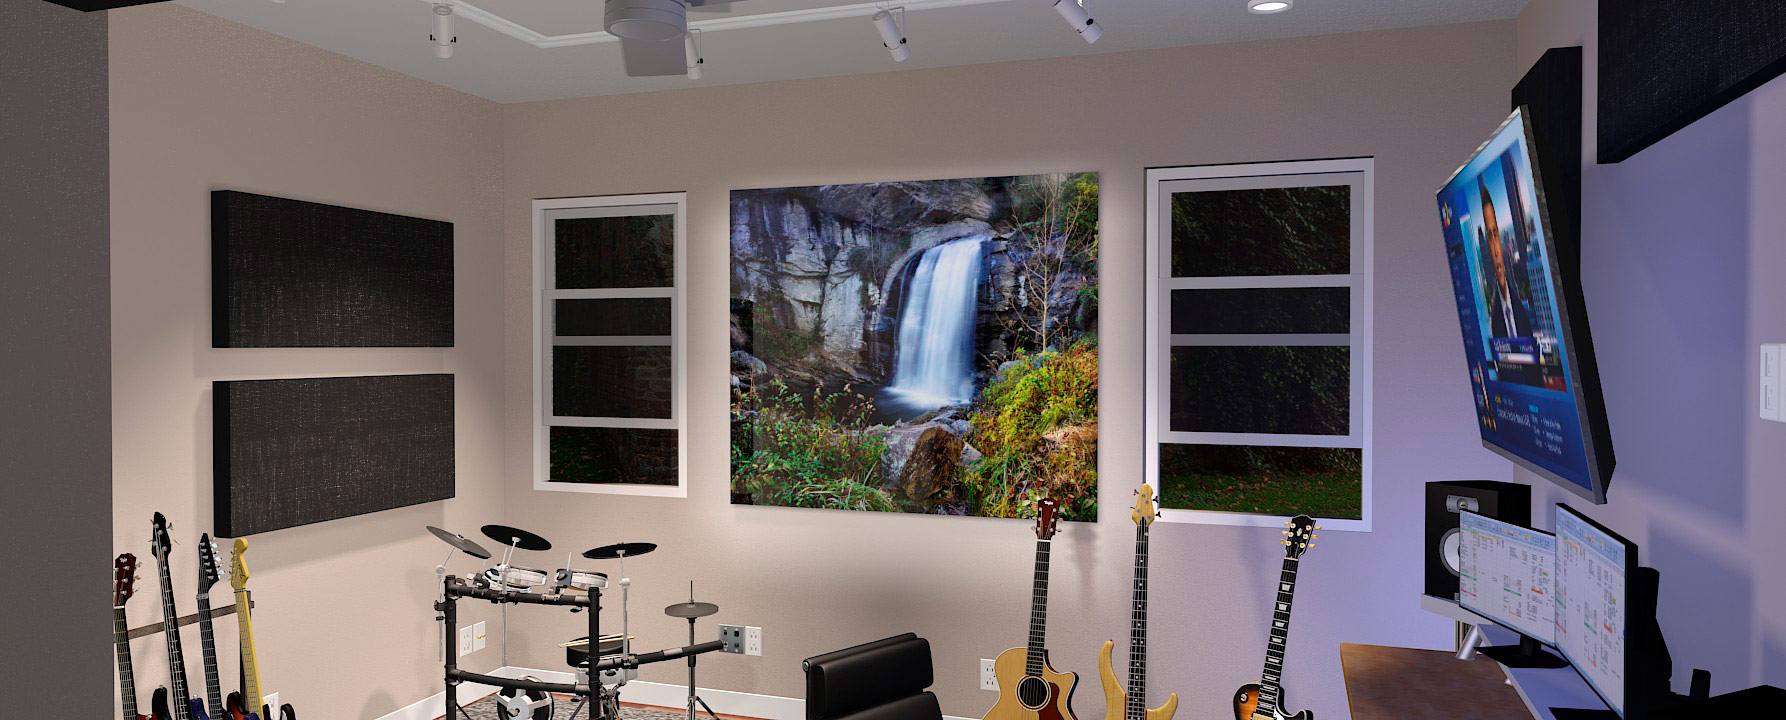 Large format fine art photograph of Looking Glass Falls Image